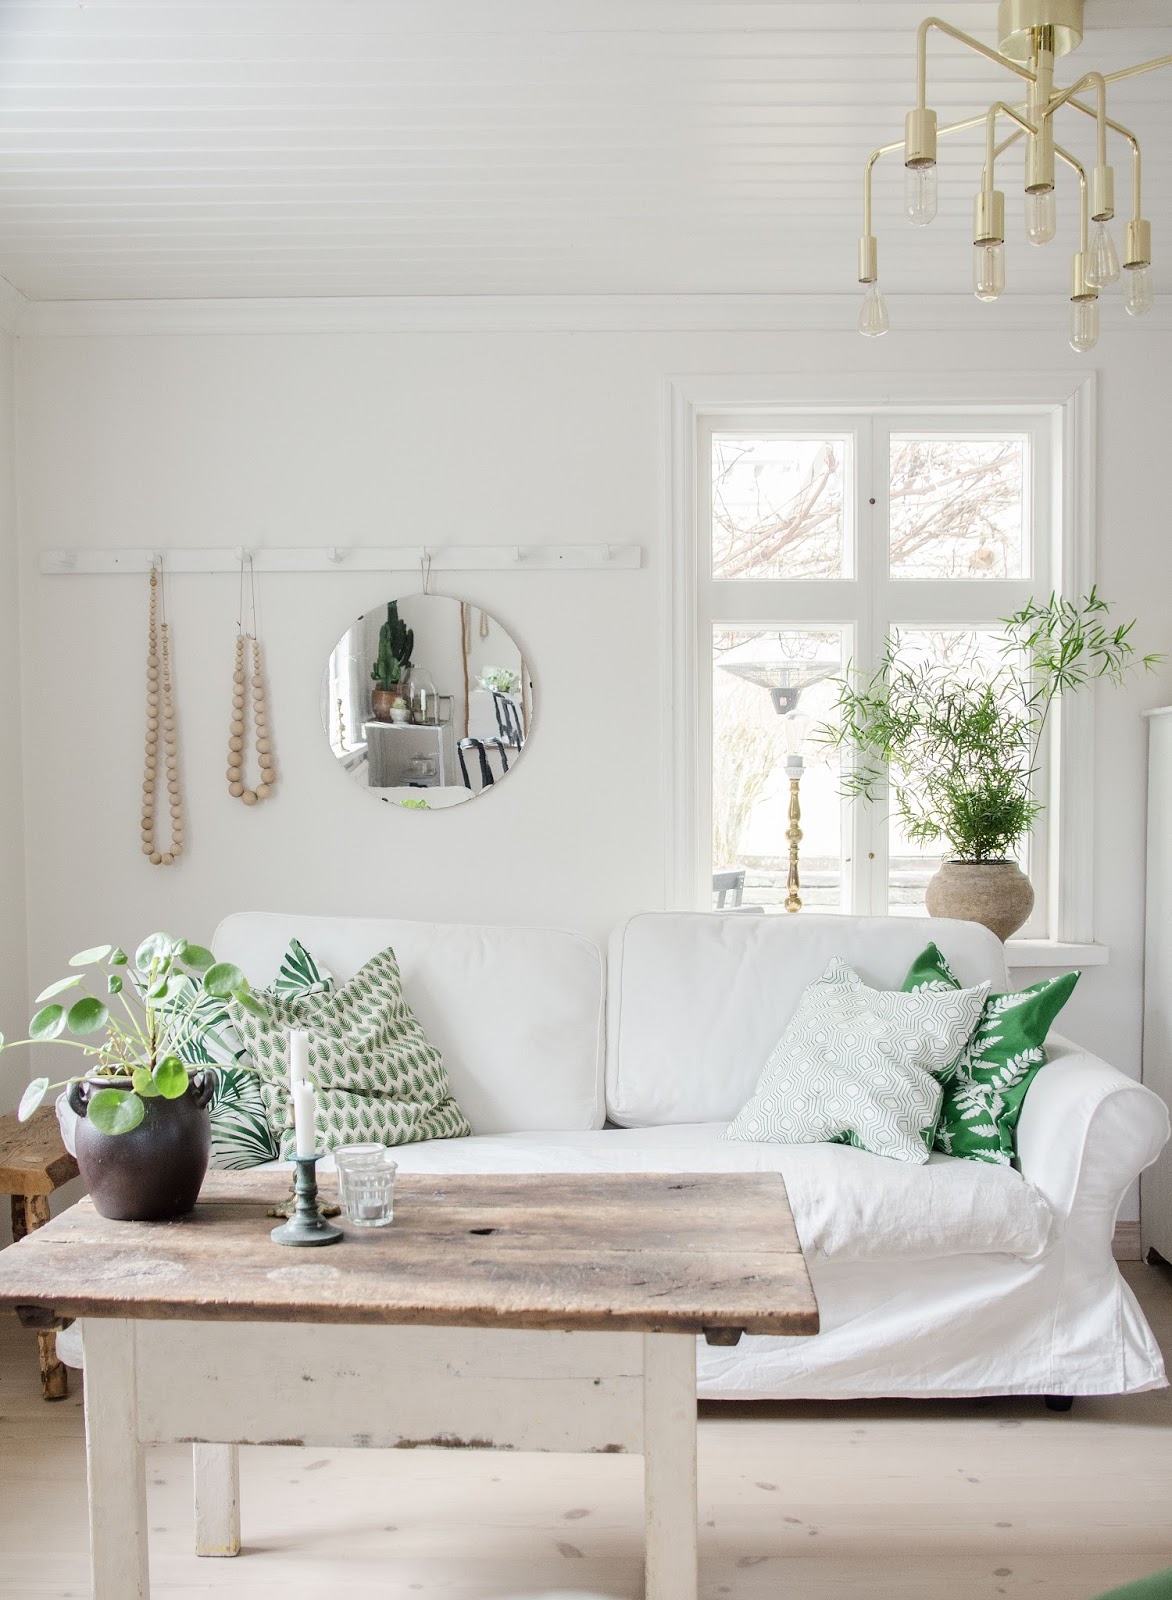 Pantone's Color Of The Year Greenery | Decorating Your Apartment | Green Throw Pillows